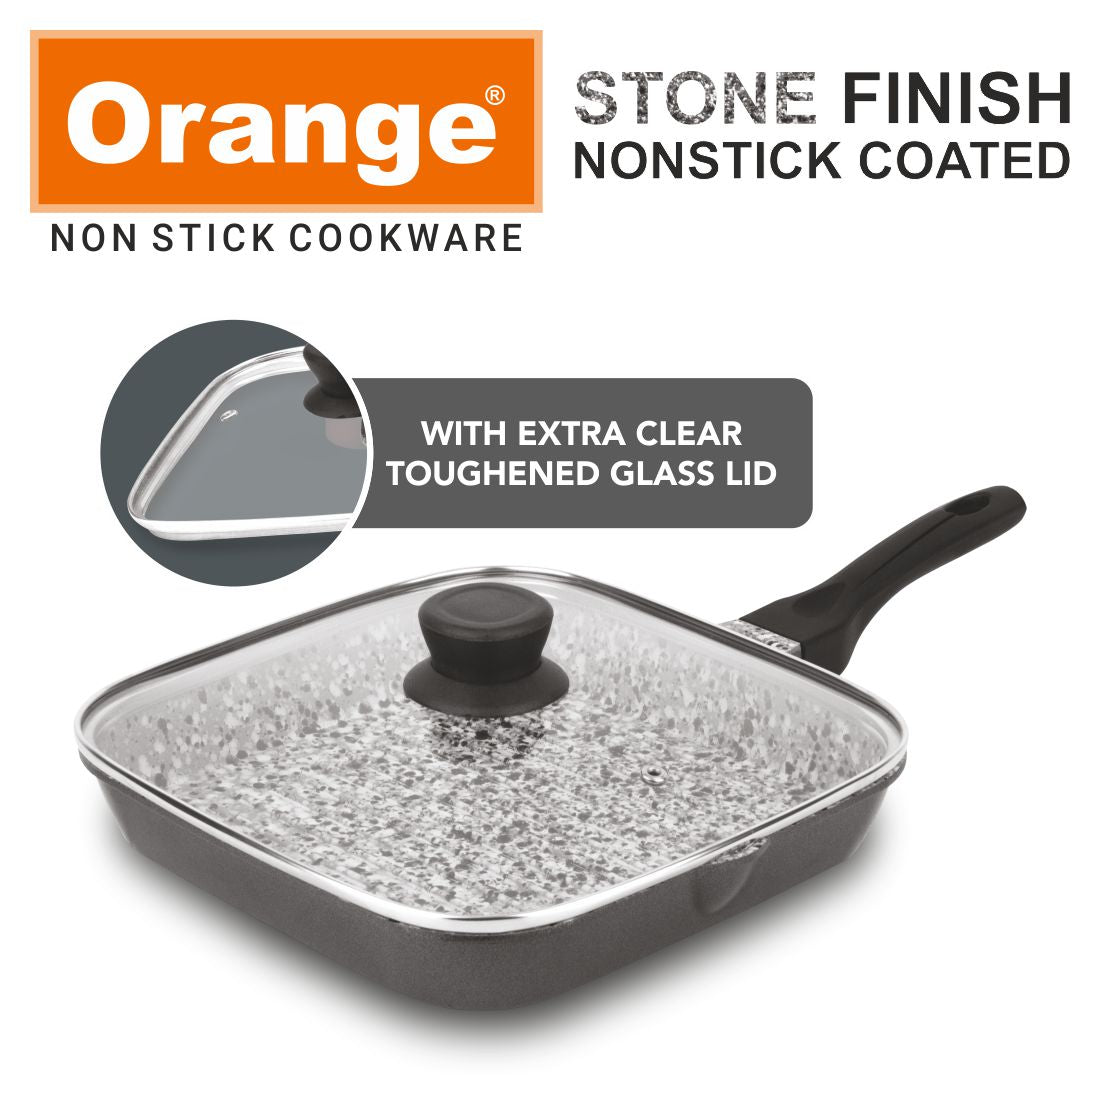 Orange Stone Finish Rockstar Nonstick Heavy coated Grill Pan with glass lid for Barbeque/Tandoori/Sandwich with cool touch long handles